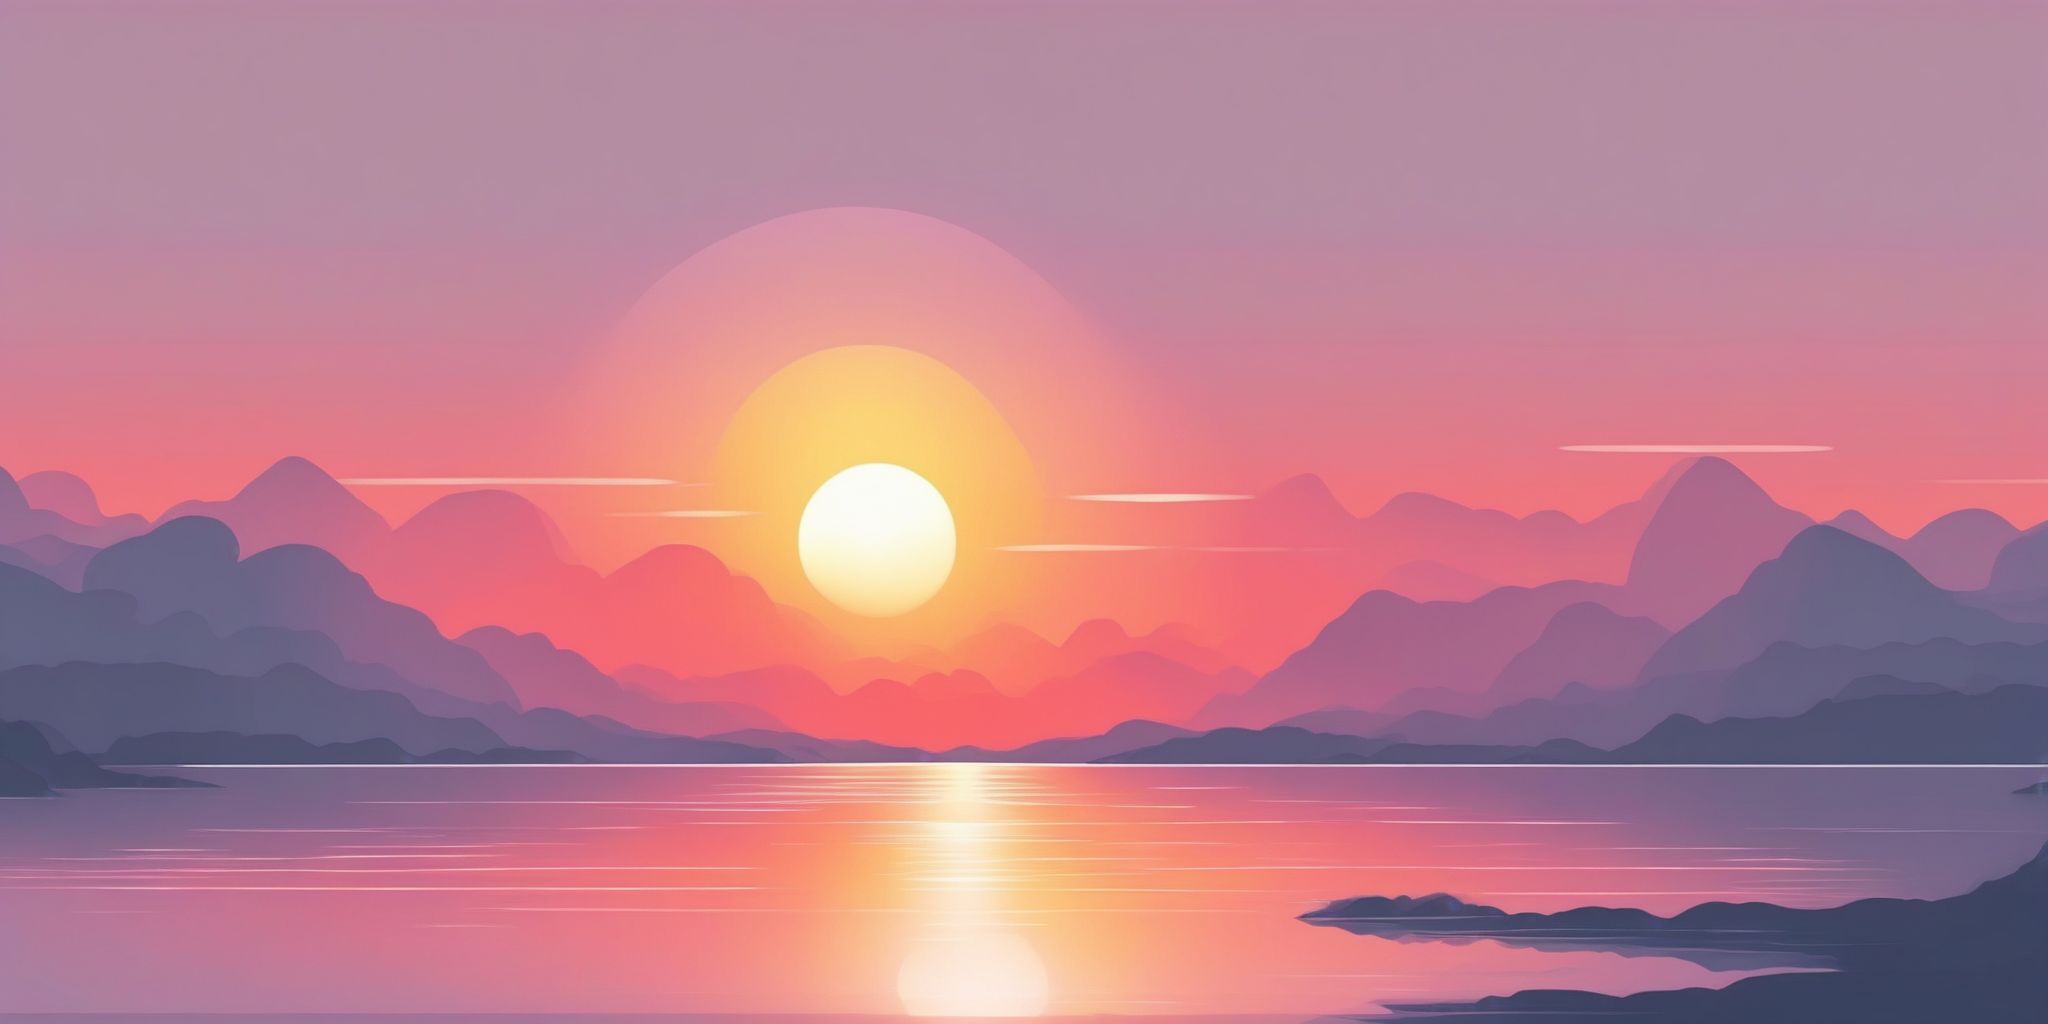 sunrise in illustration style with gradients and white background